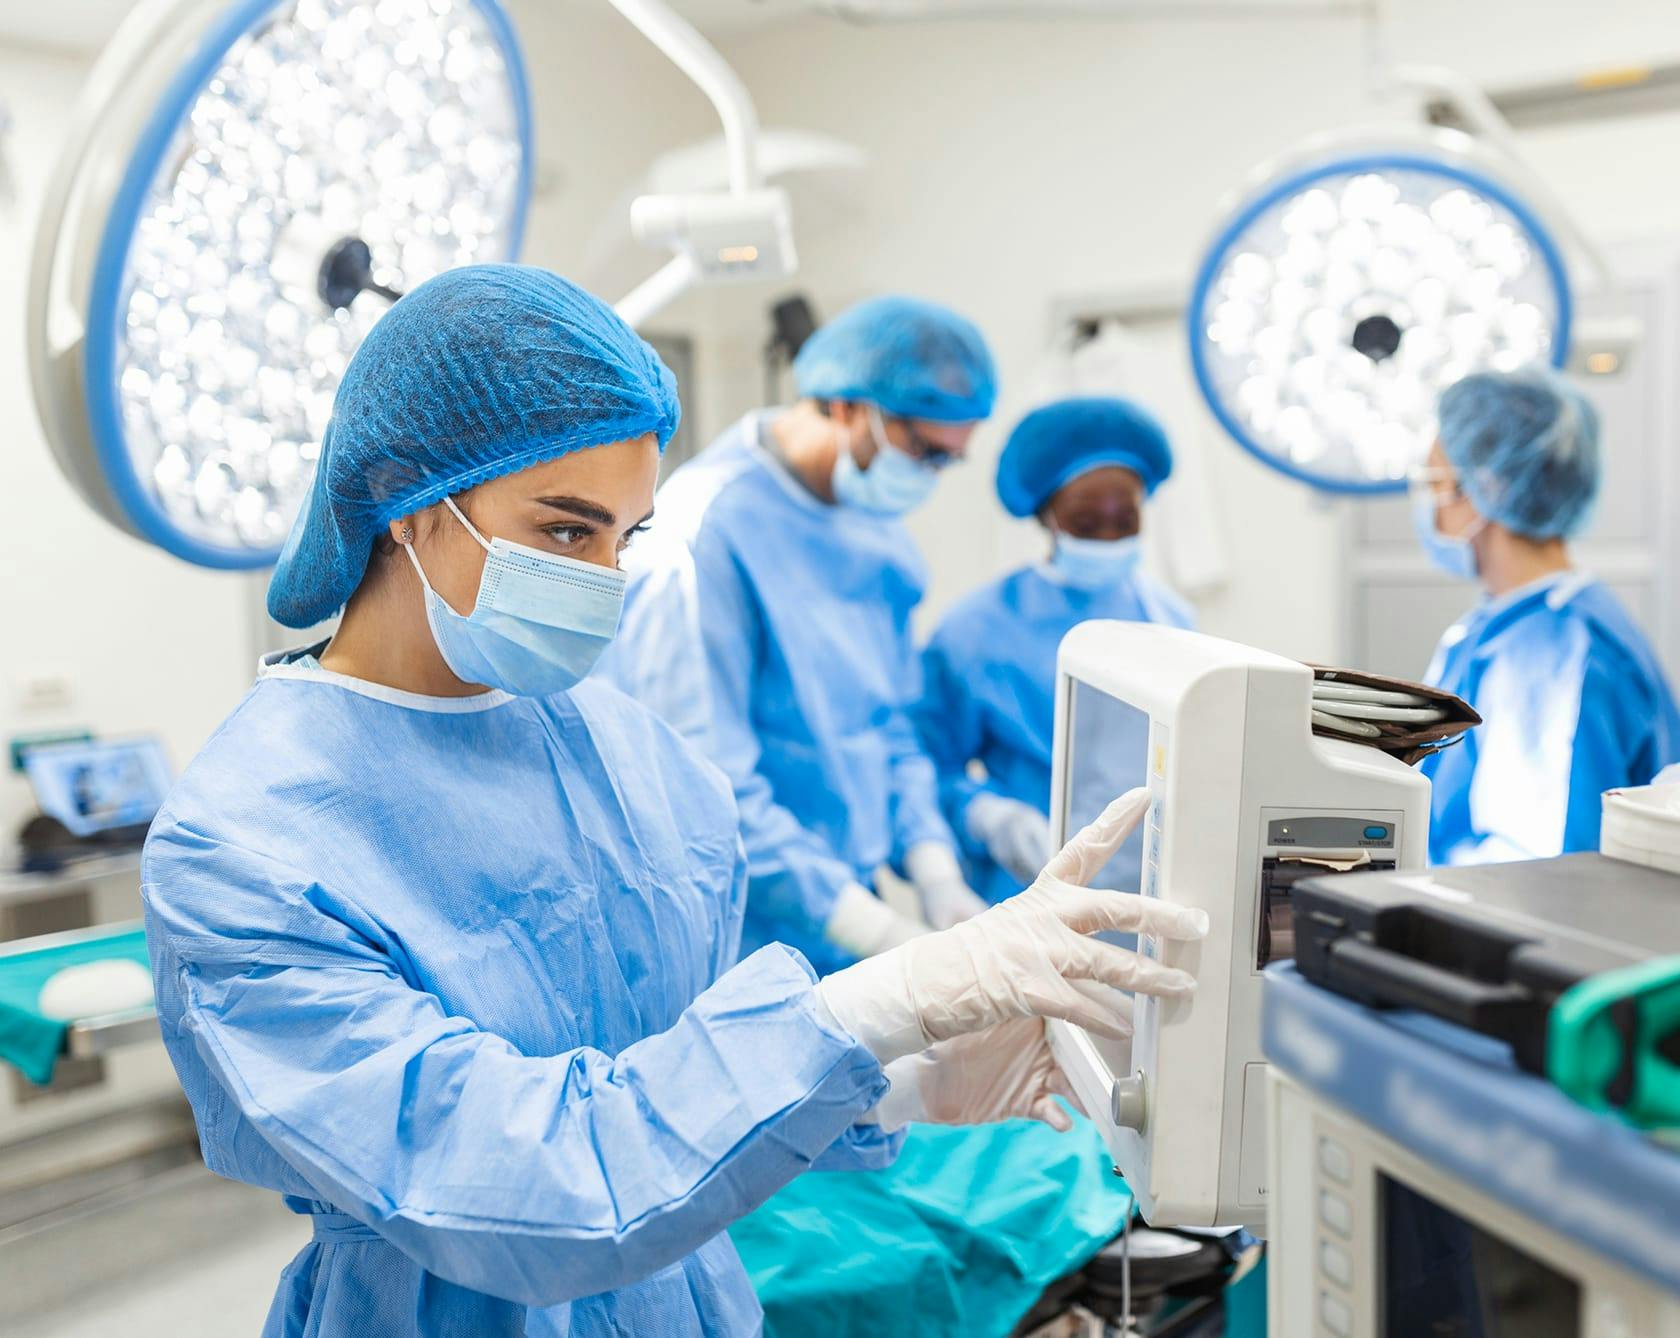 an image of a group of people in an operating room